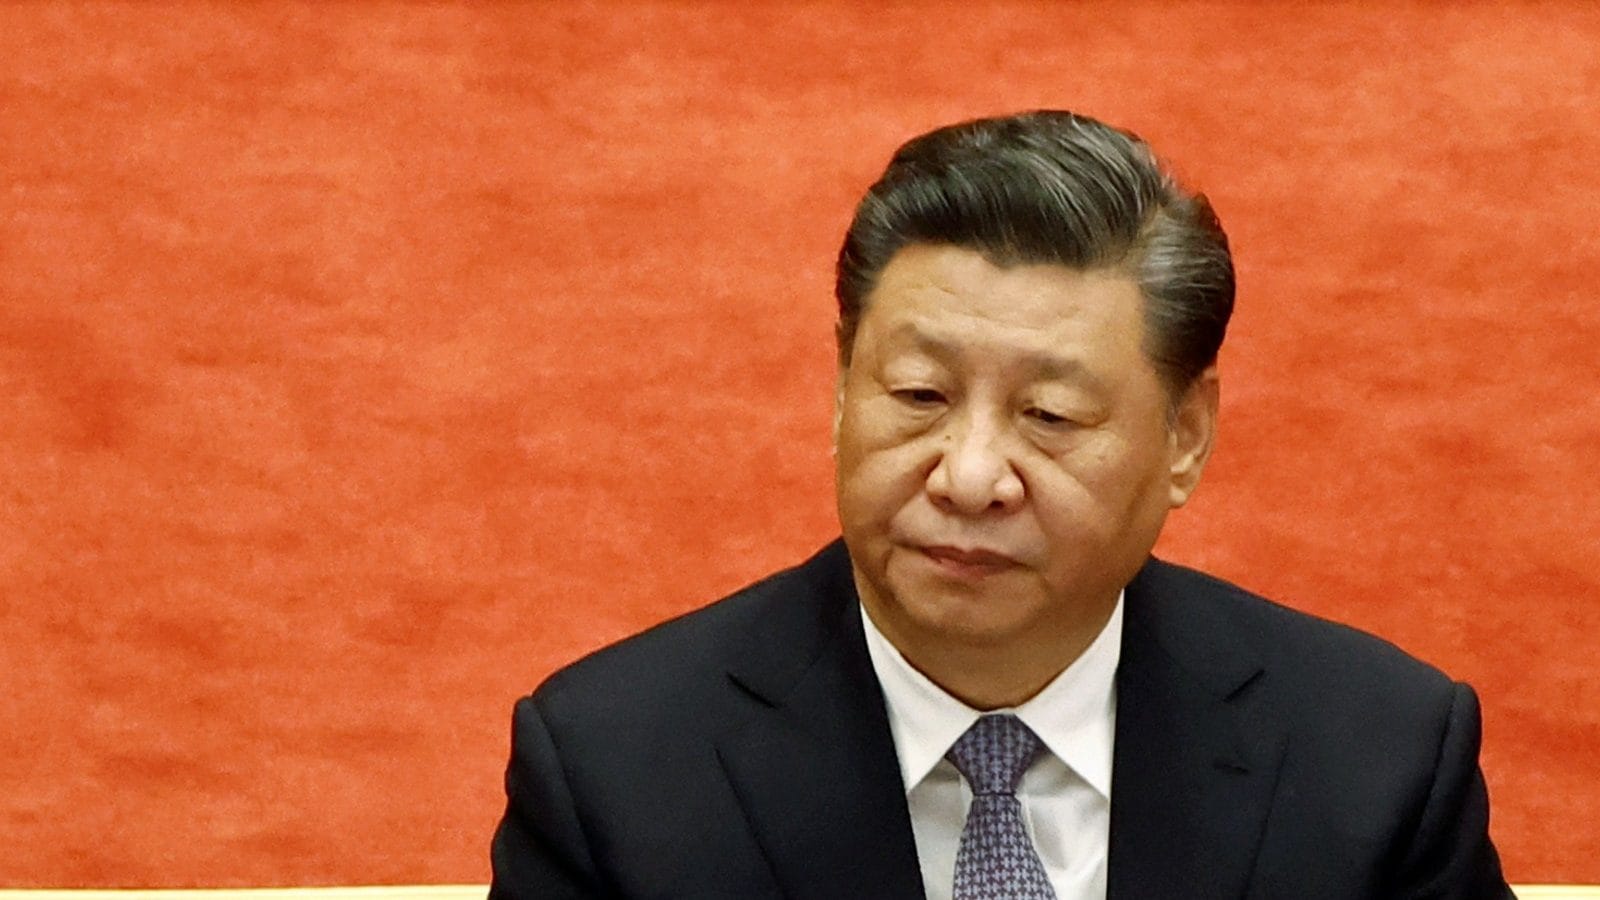 'Xi Jinping Ousted, Under House Arrest?': Internet Abuzz with Biggest 'Coup' Rumours About Chinese Presiden - News18